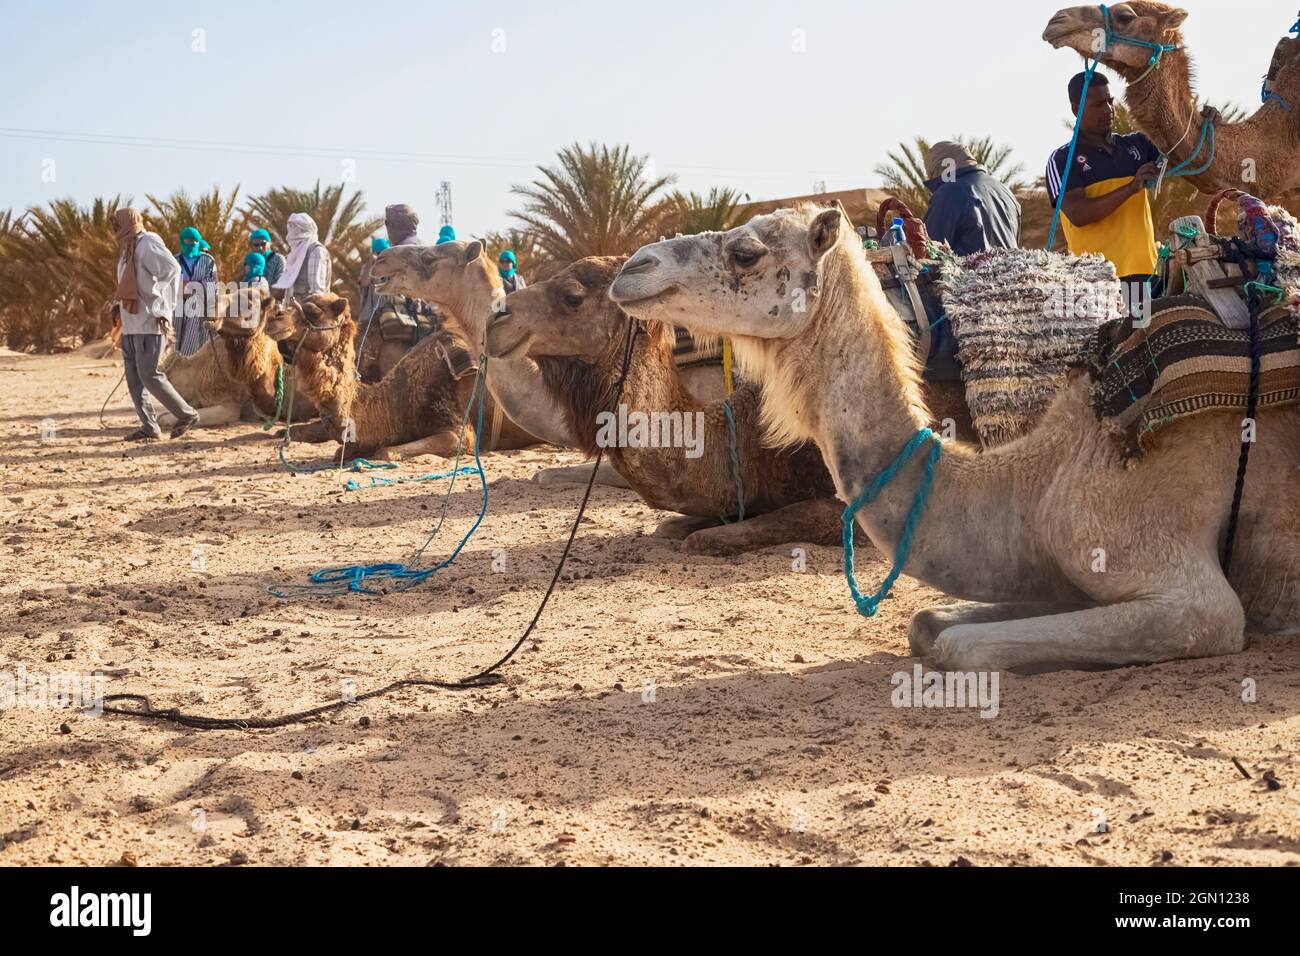 Dromedary Camel sits on the sand in the Sahara Desert, resting. Stock Photo